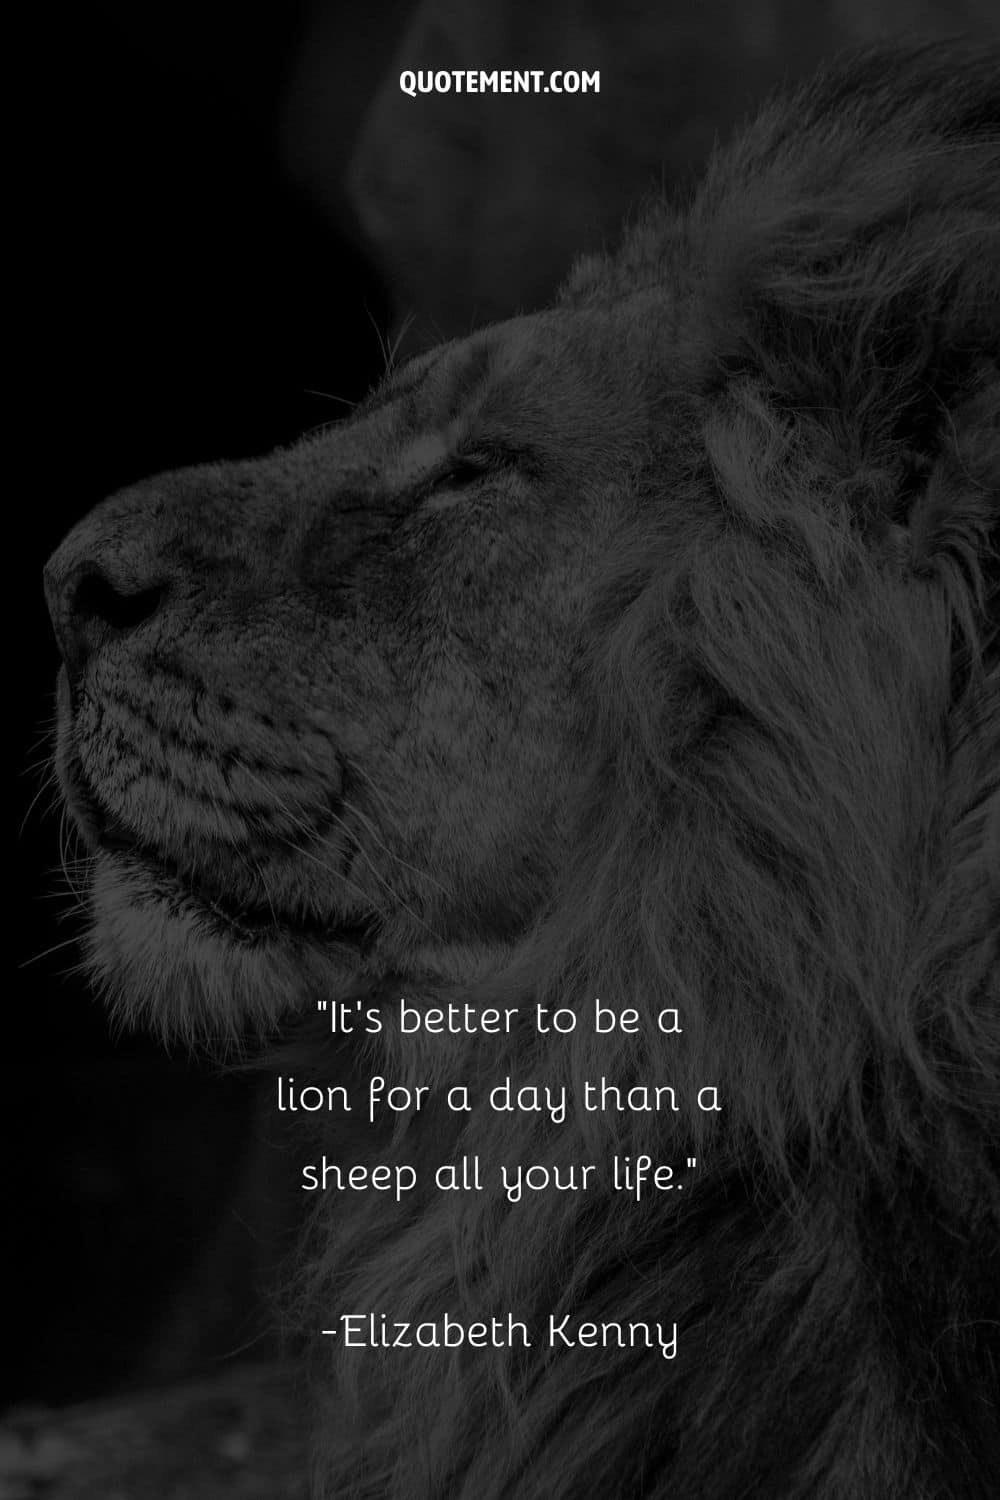 lion's head side image representing lion inspirational quote